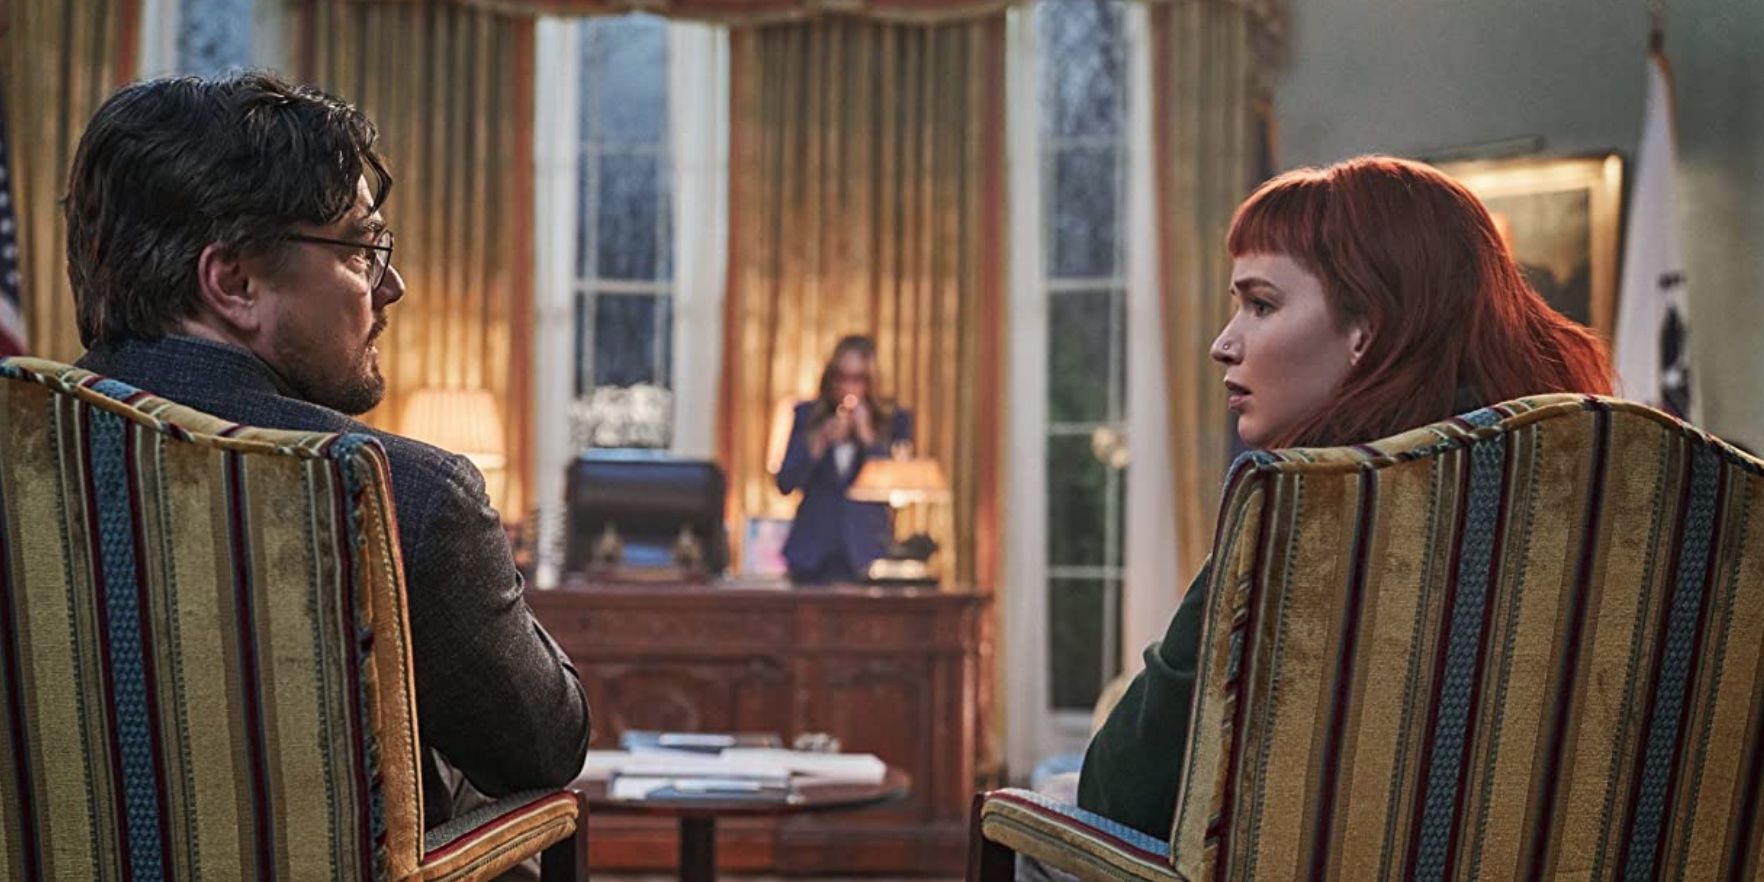 Leonardo DiCaprio and Jennifer Lawrence sitting in the President's Office in 'Don't Look Up'